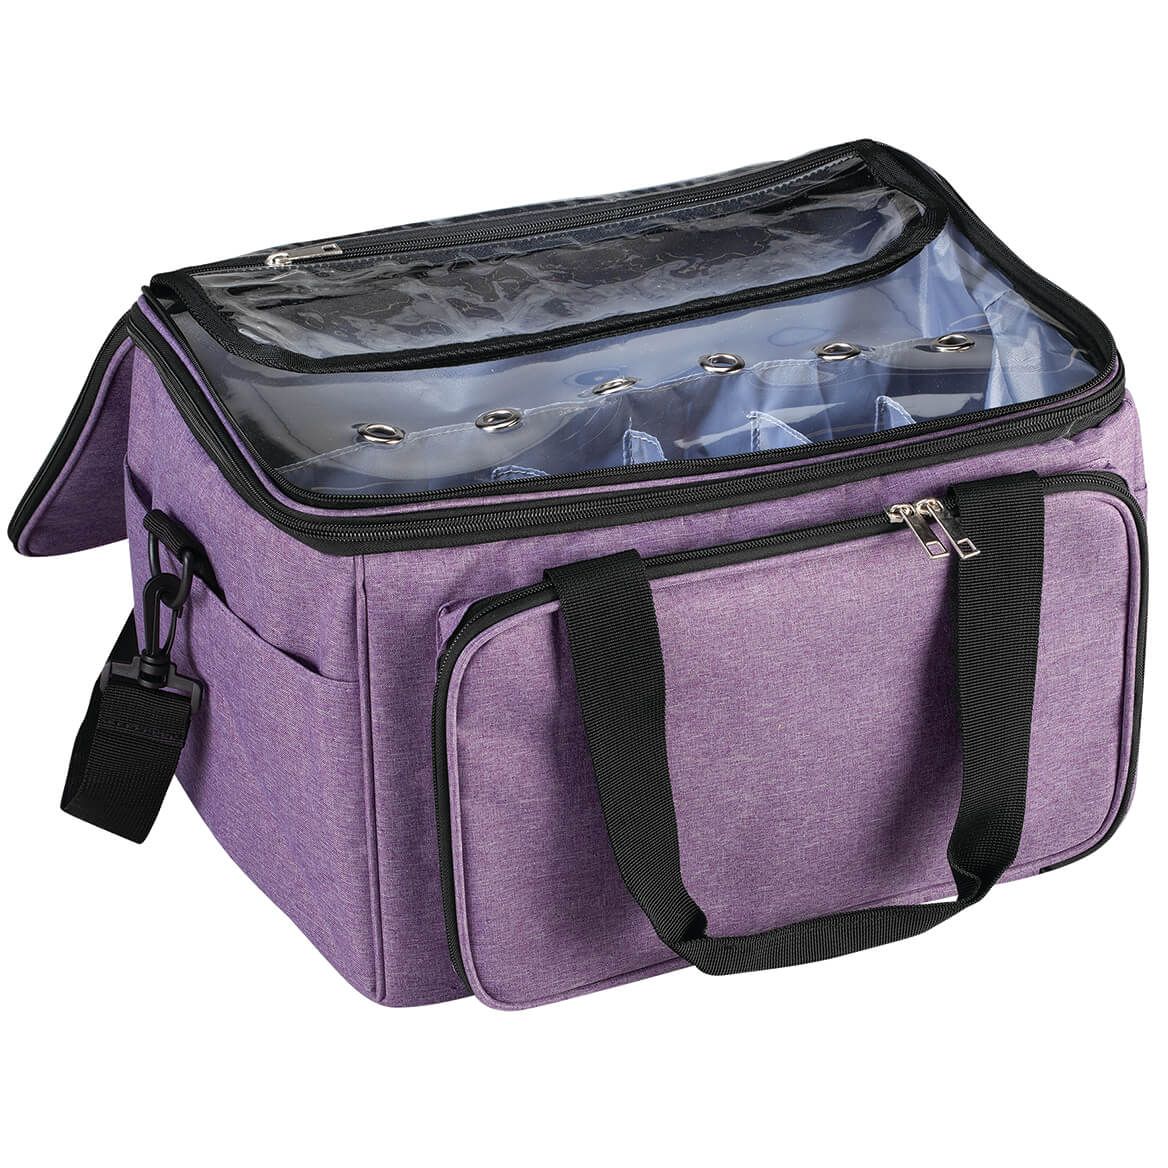 Deluxe Knitting and Crochet Storage Bag + '-' + 373963